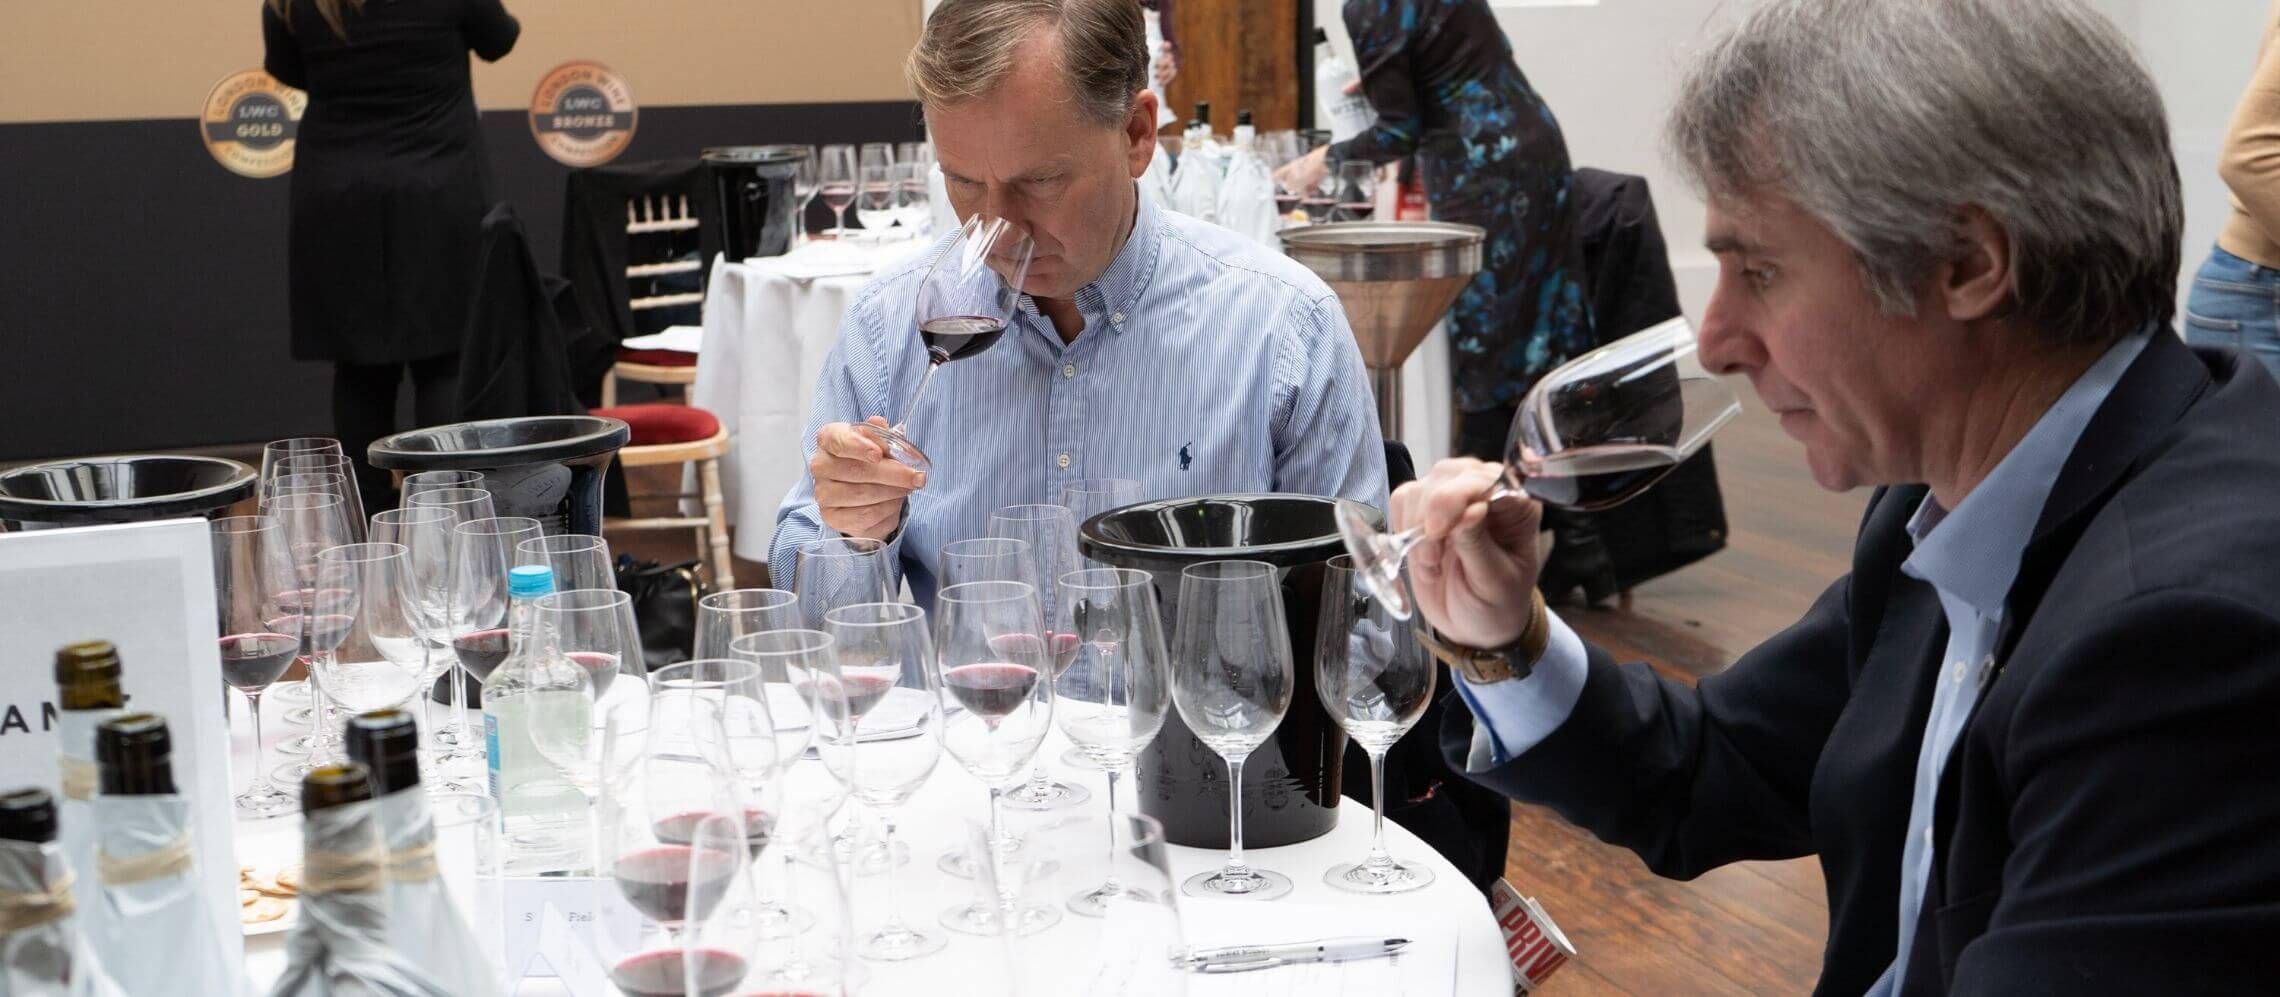 Photo for: Meet The Judges - 2020 London Wine Competition